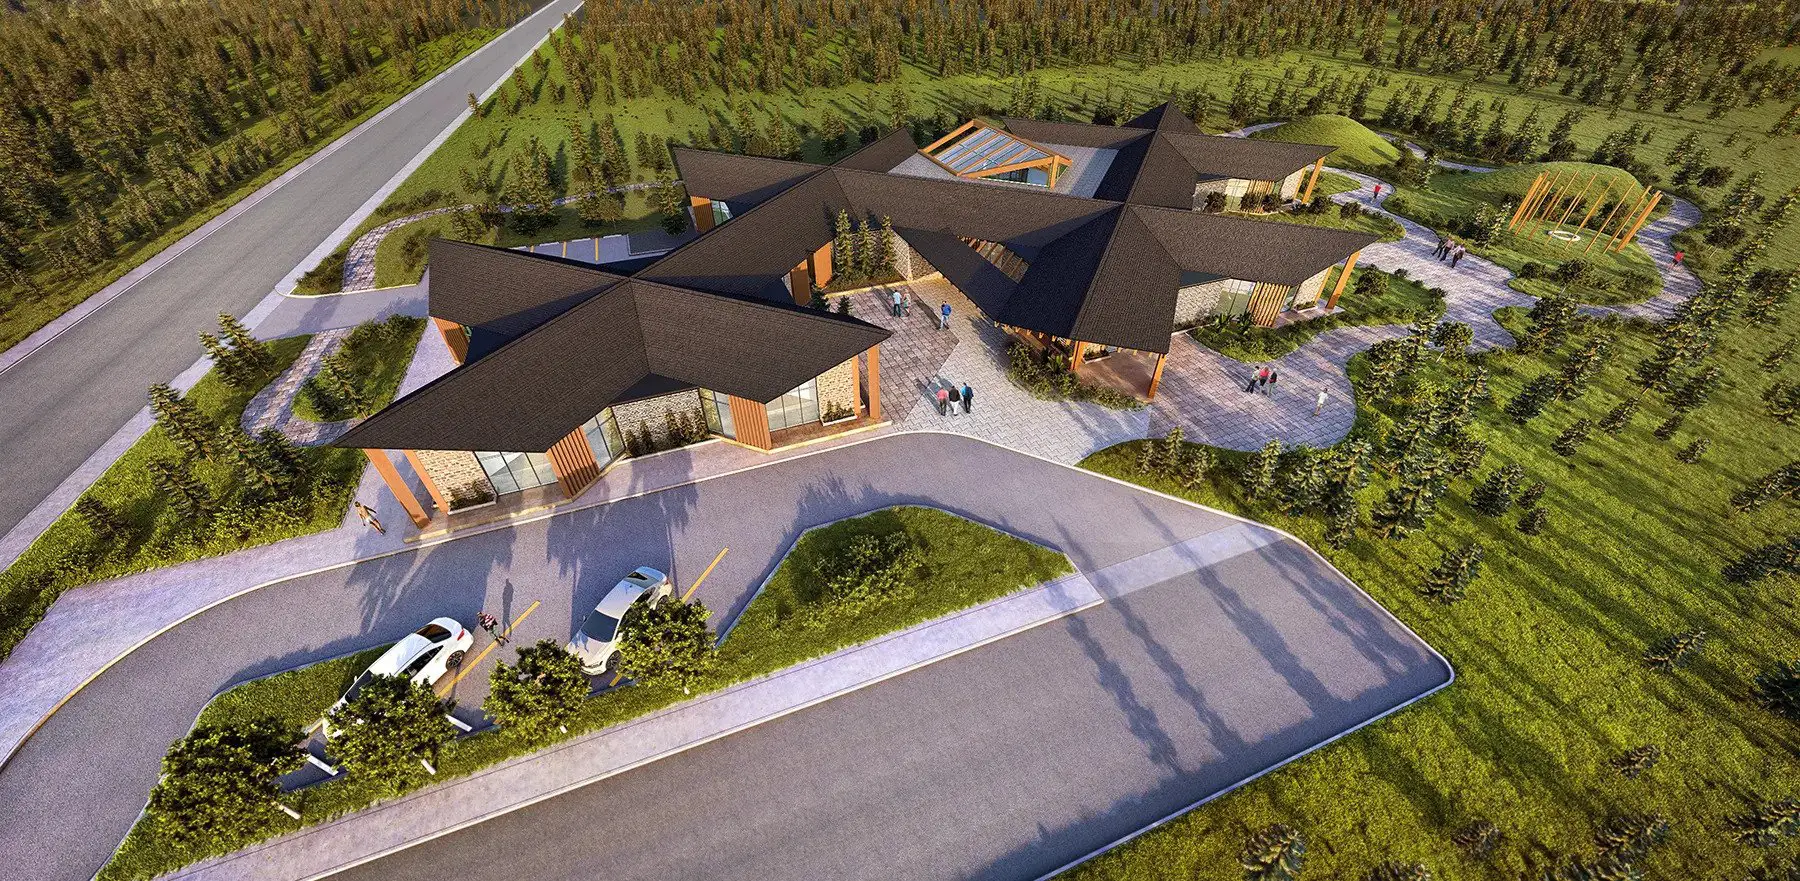 Bow Valley Hospice Concept, Canmore, AB, designed by METAFOR